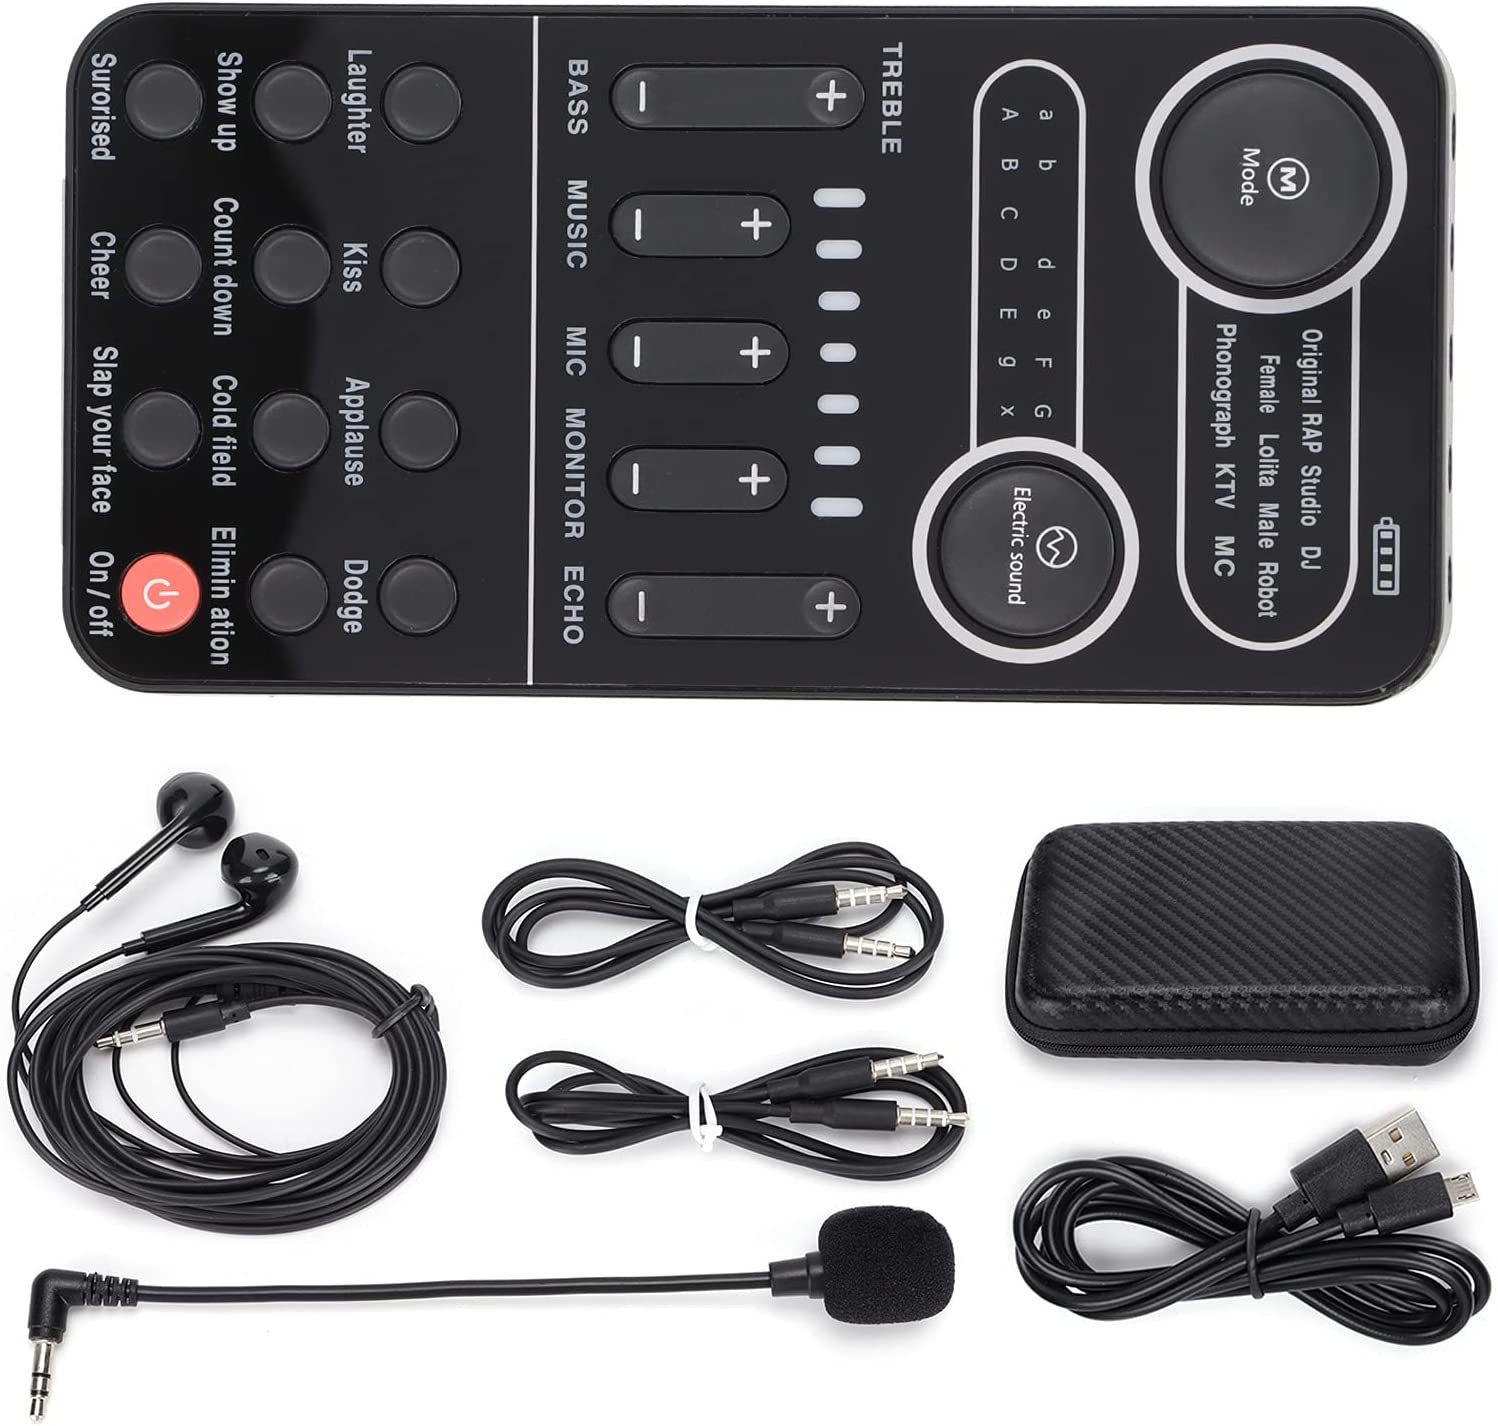 Primary image for Vocal Processor, Sound Card For Pc, Professional Intelligent Noise Reduction, K9